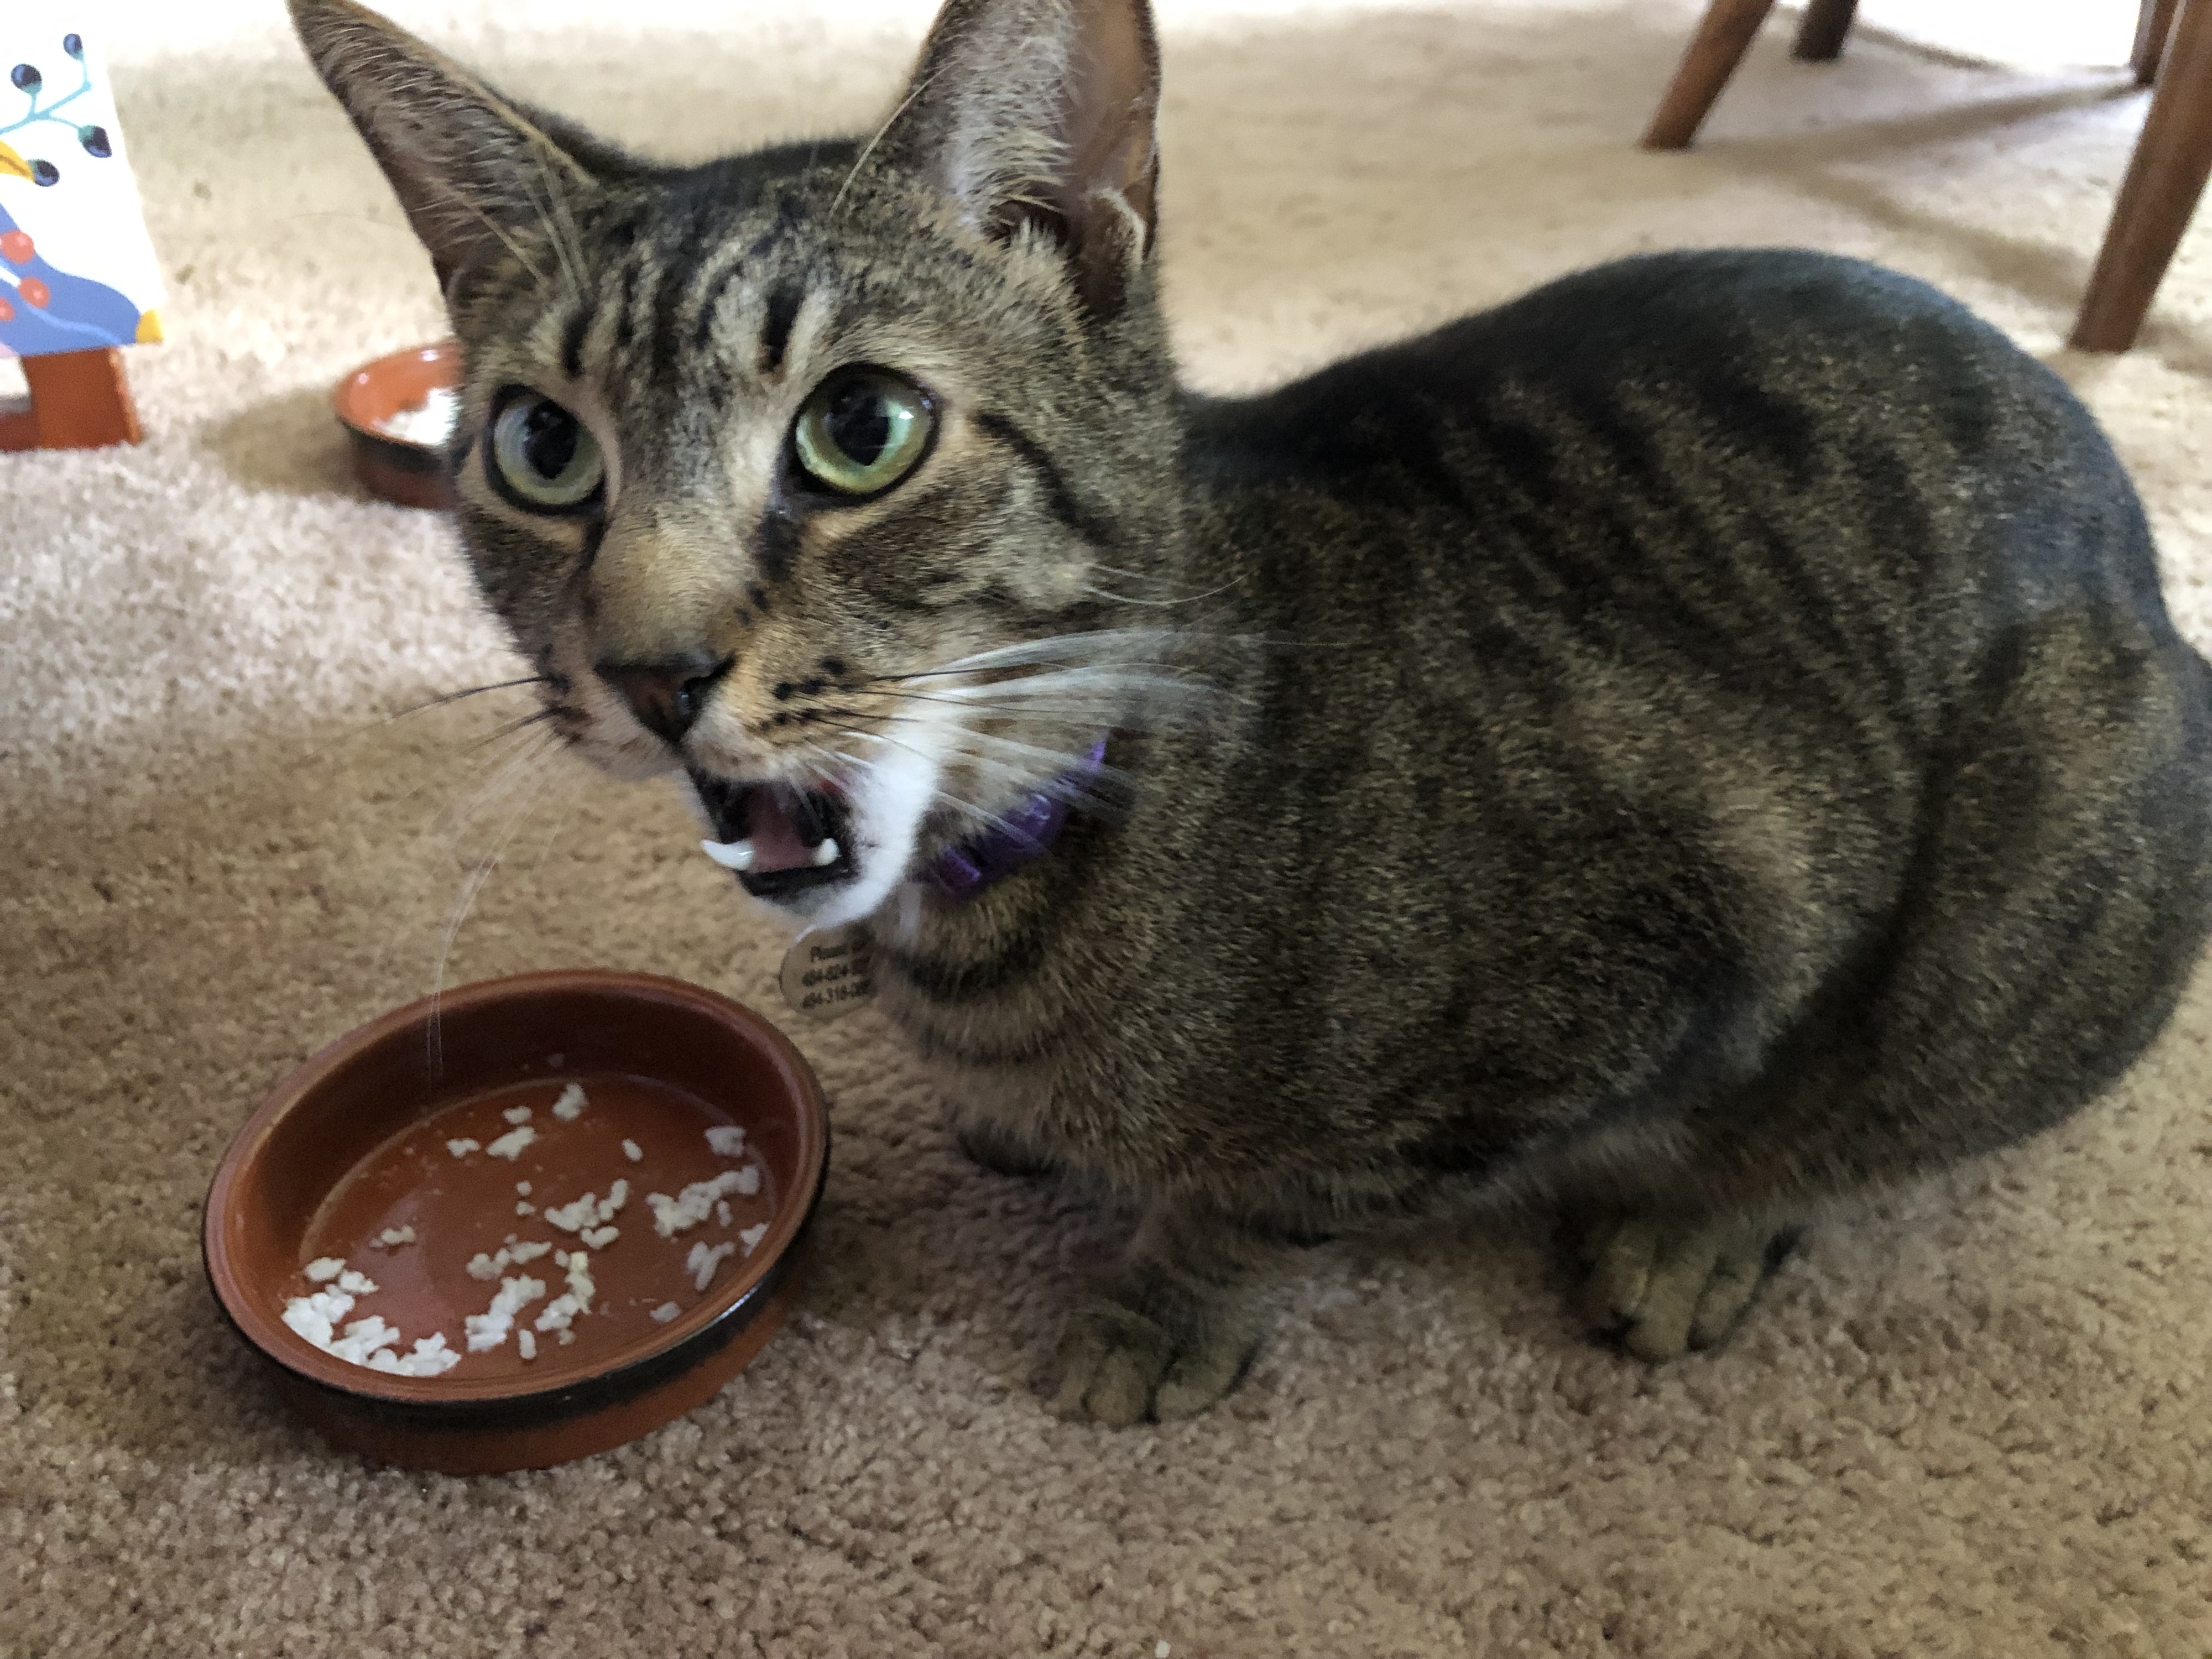 Tabby cat with open mouth beside an almost empty food bowl on a carpet